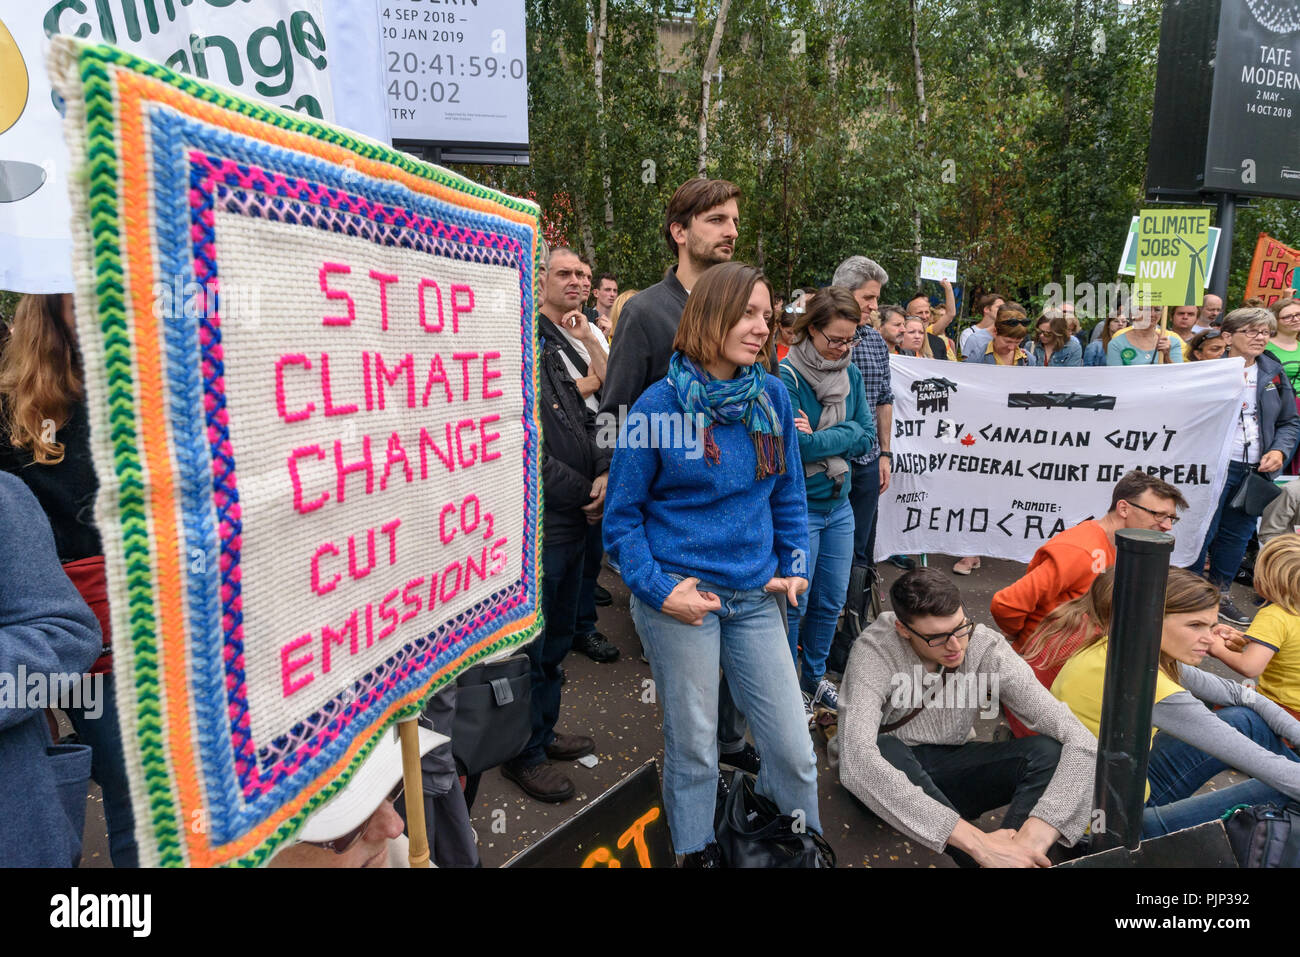 London, UK. 8th September 2018. Climate Reality supporters hold a rally in front of Tate Modern, one of thousands around the world demanding urgent action by government leaders to leaders commit to a fossil free world that works for all of us.  community leaders, organisers, scientists, storytellers and others united to a Credit: Peter Marshall/Alamy Live News Stock Photo